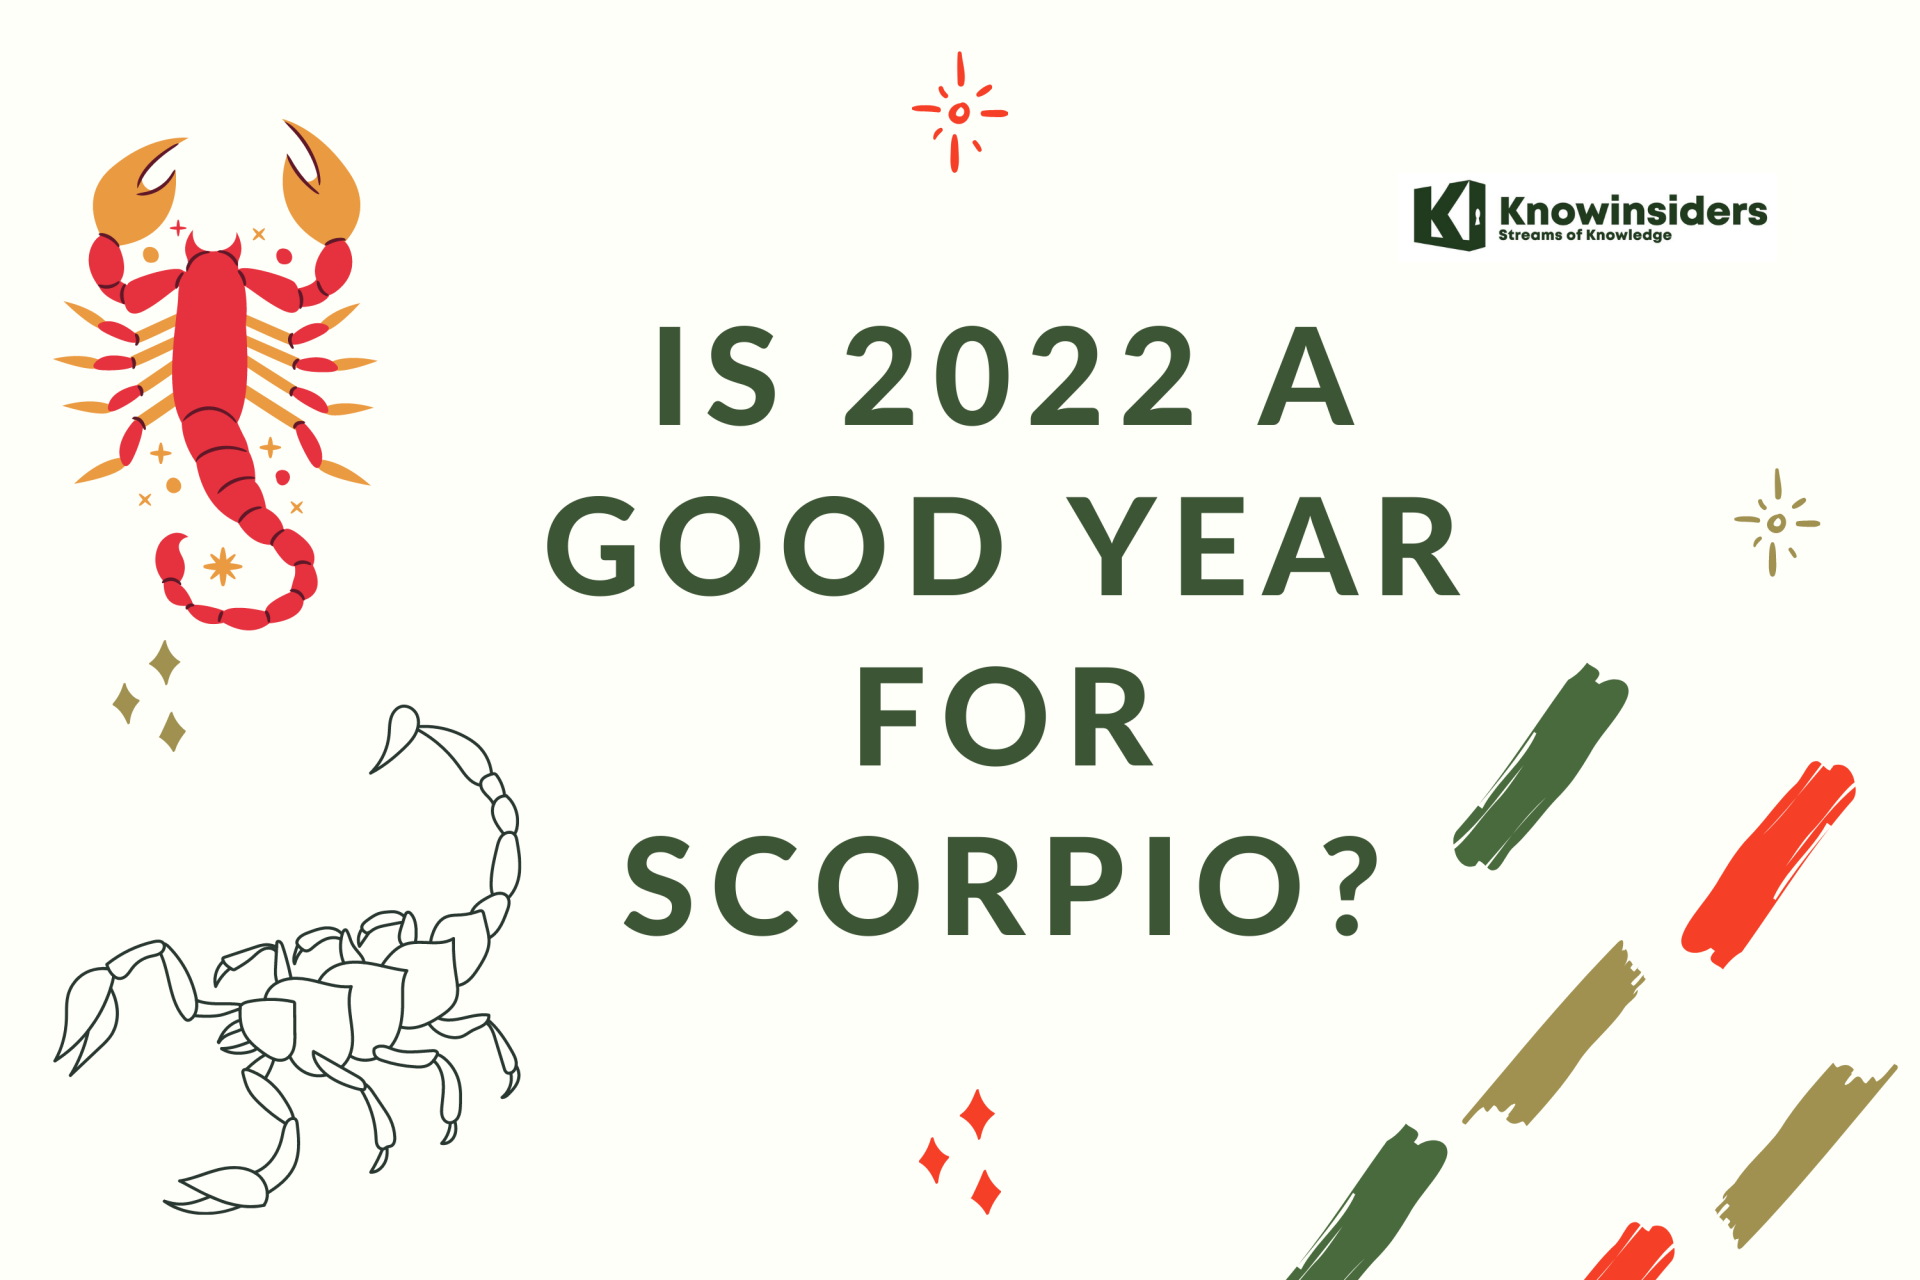 Is 2022 a Good Year for Scorpio?